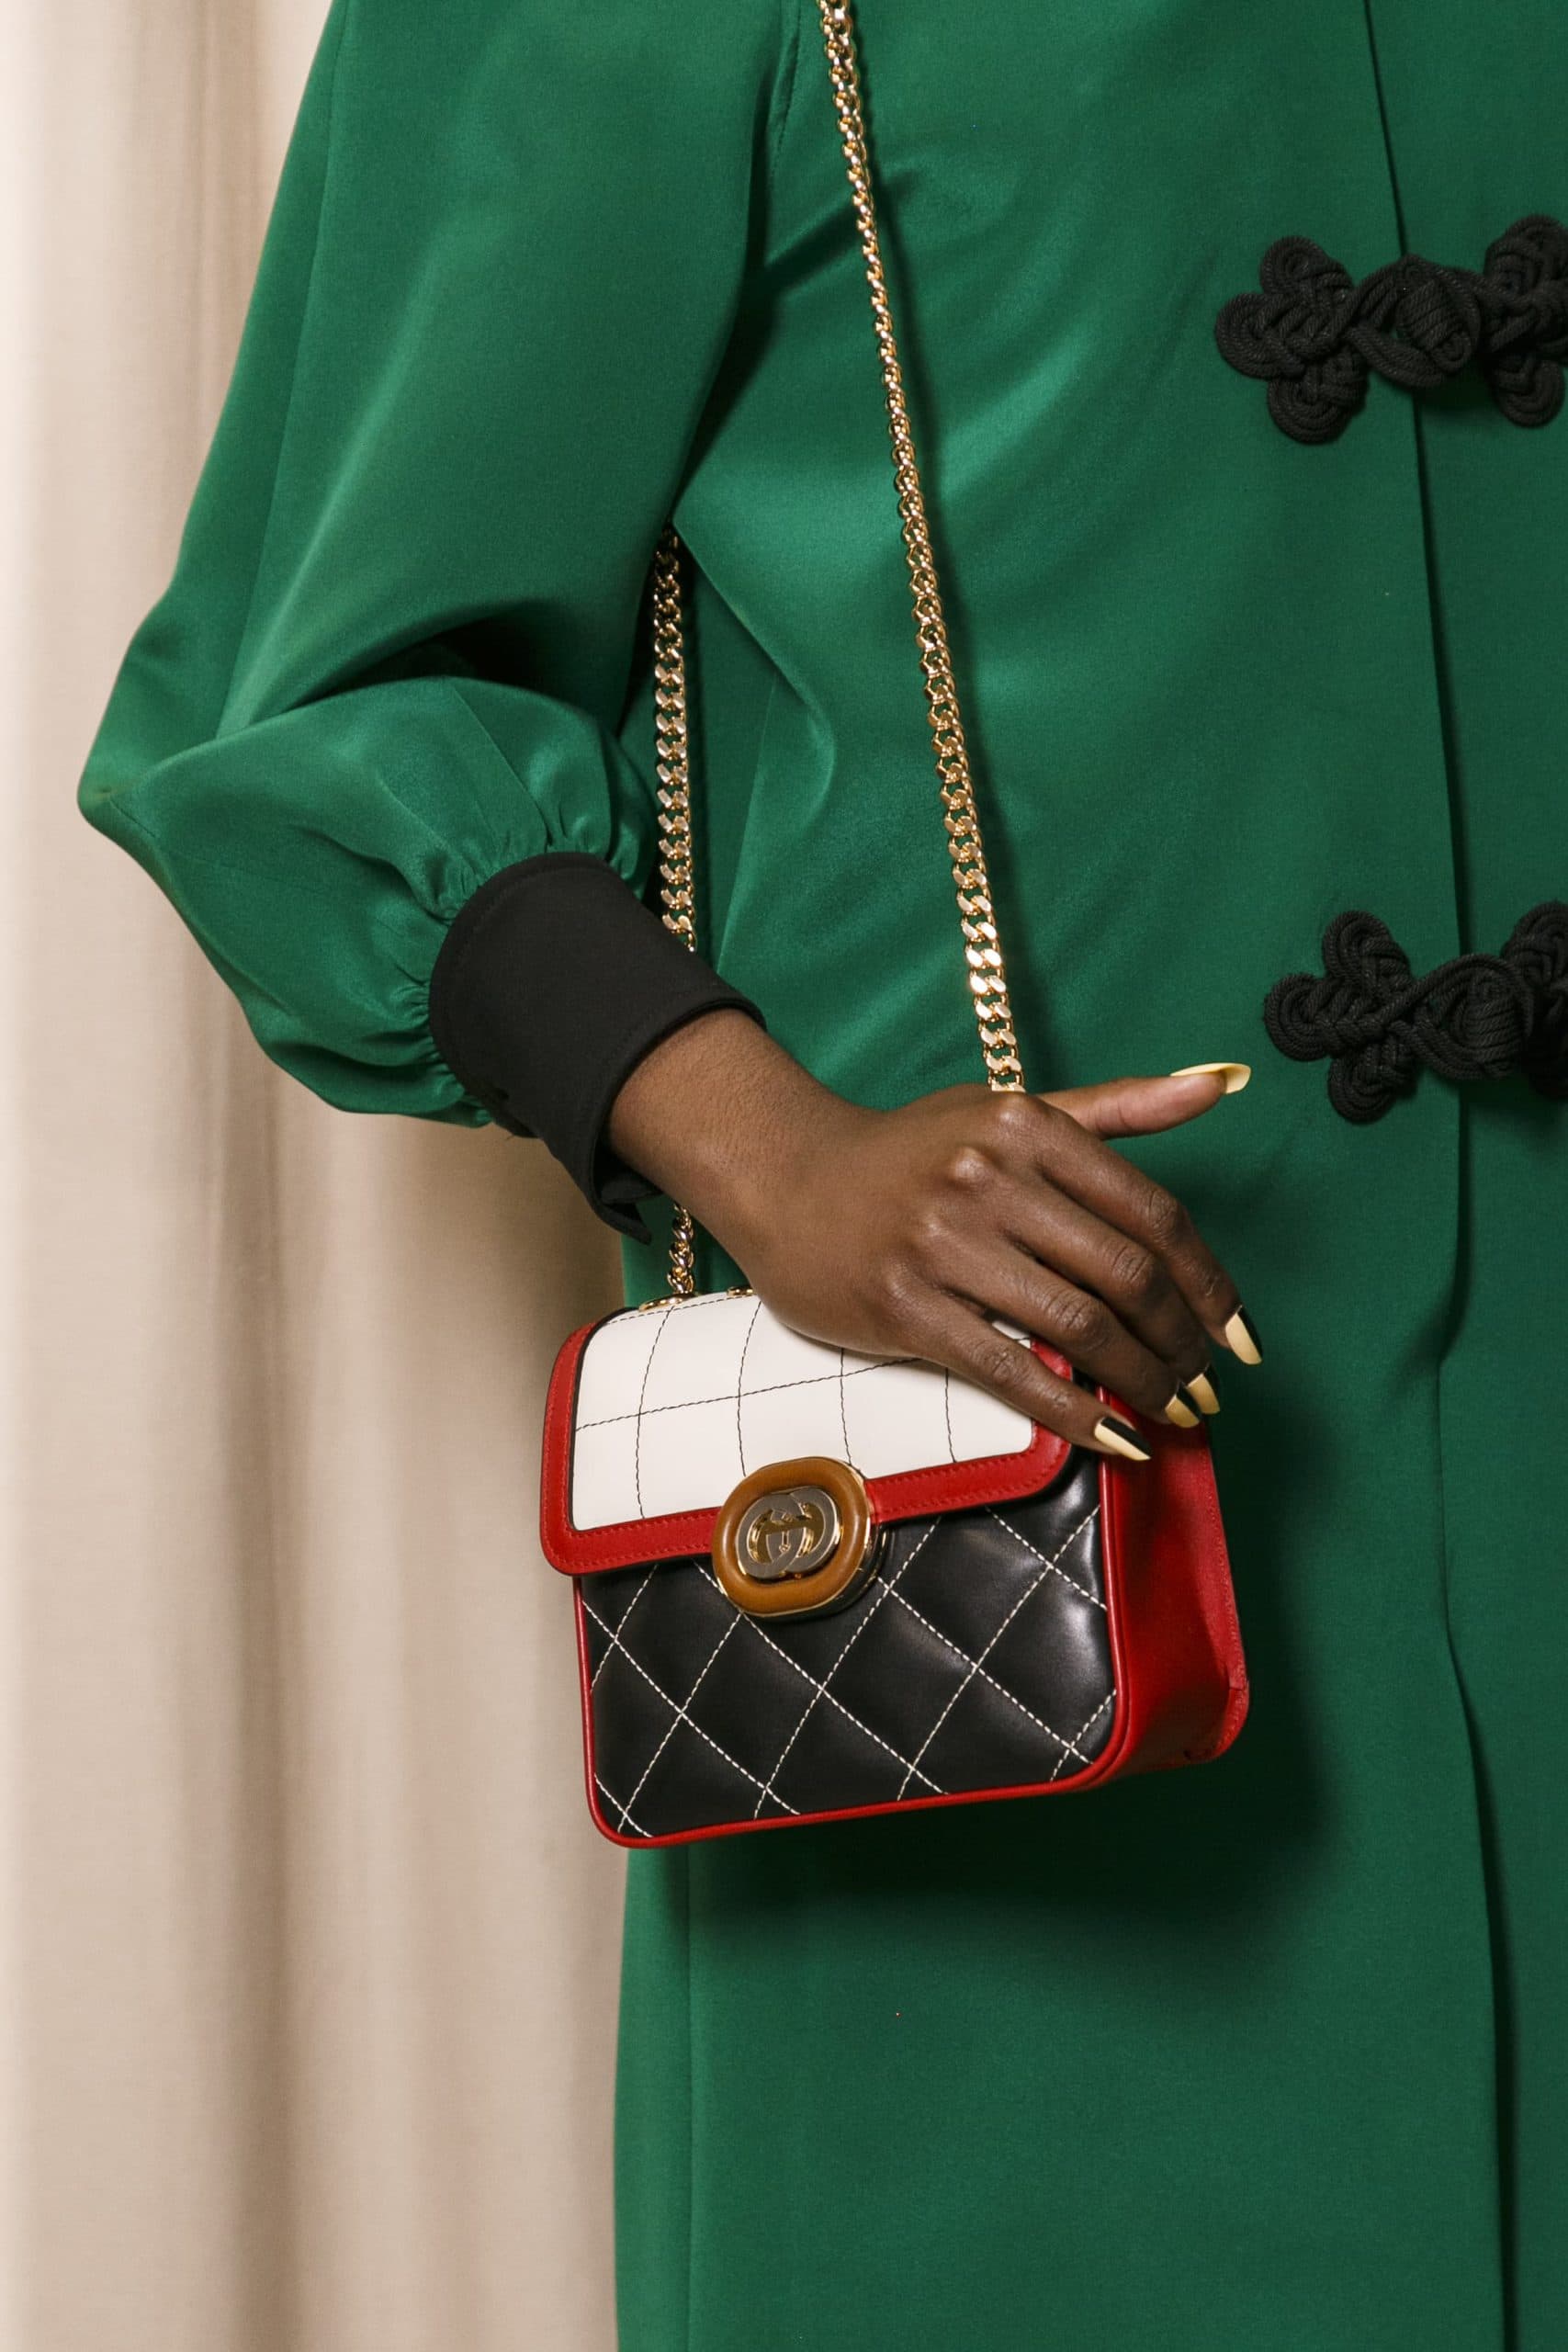 Gucci - In the Spring Summer 2023 campaign, two sets of hands present a  quilted leather bag defined by the Interlocking G. Discover more on.gucci.com/_GucciSpringSummer23